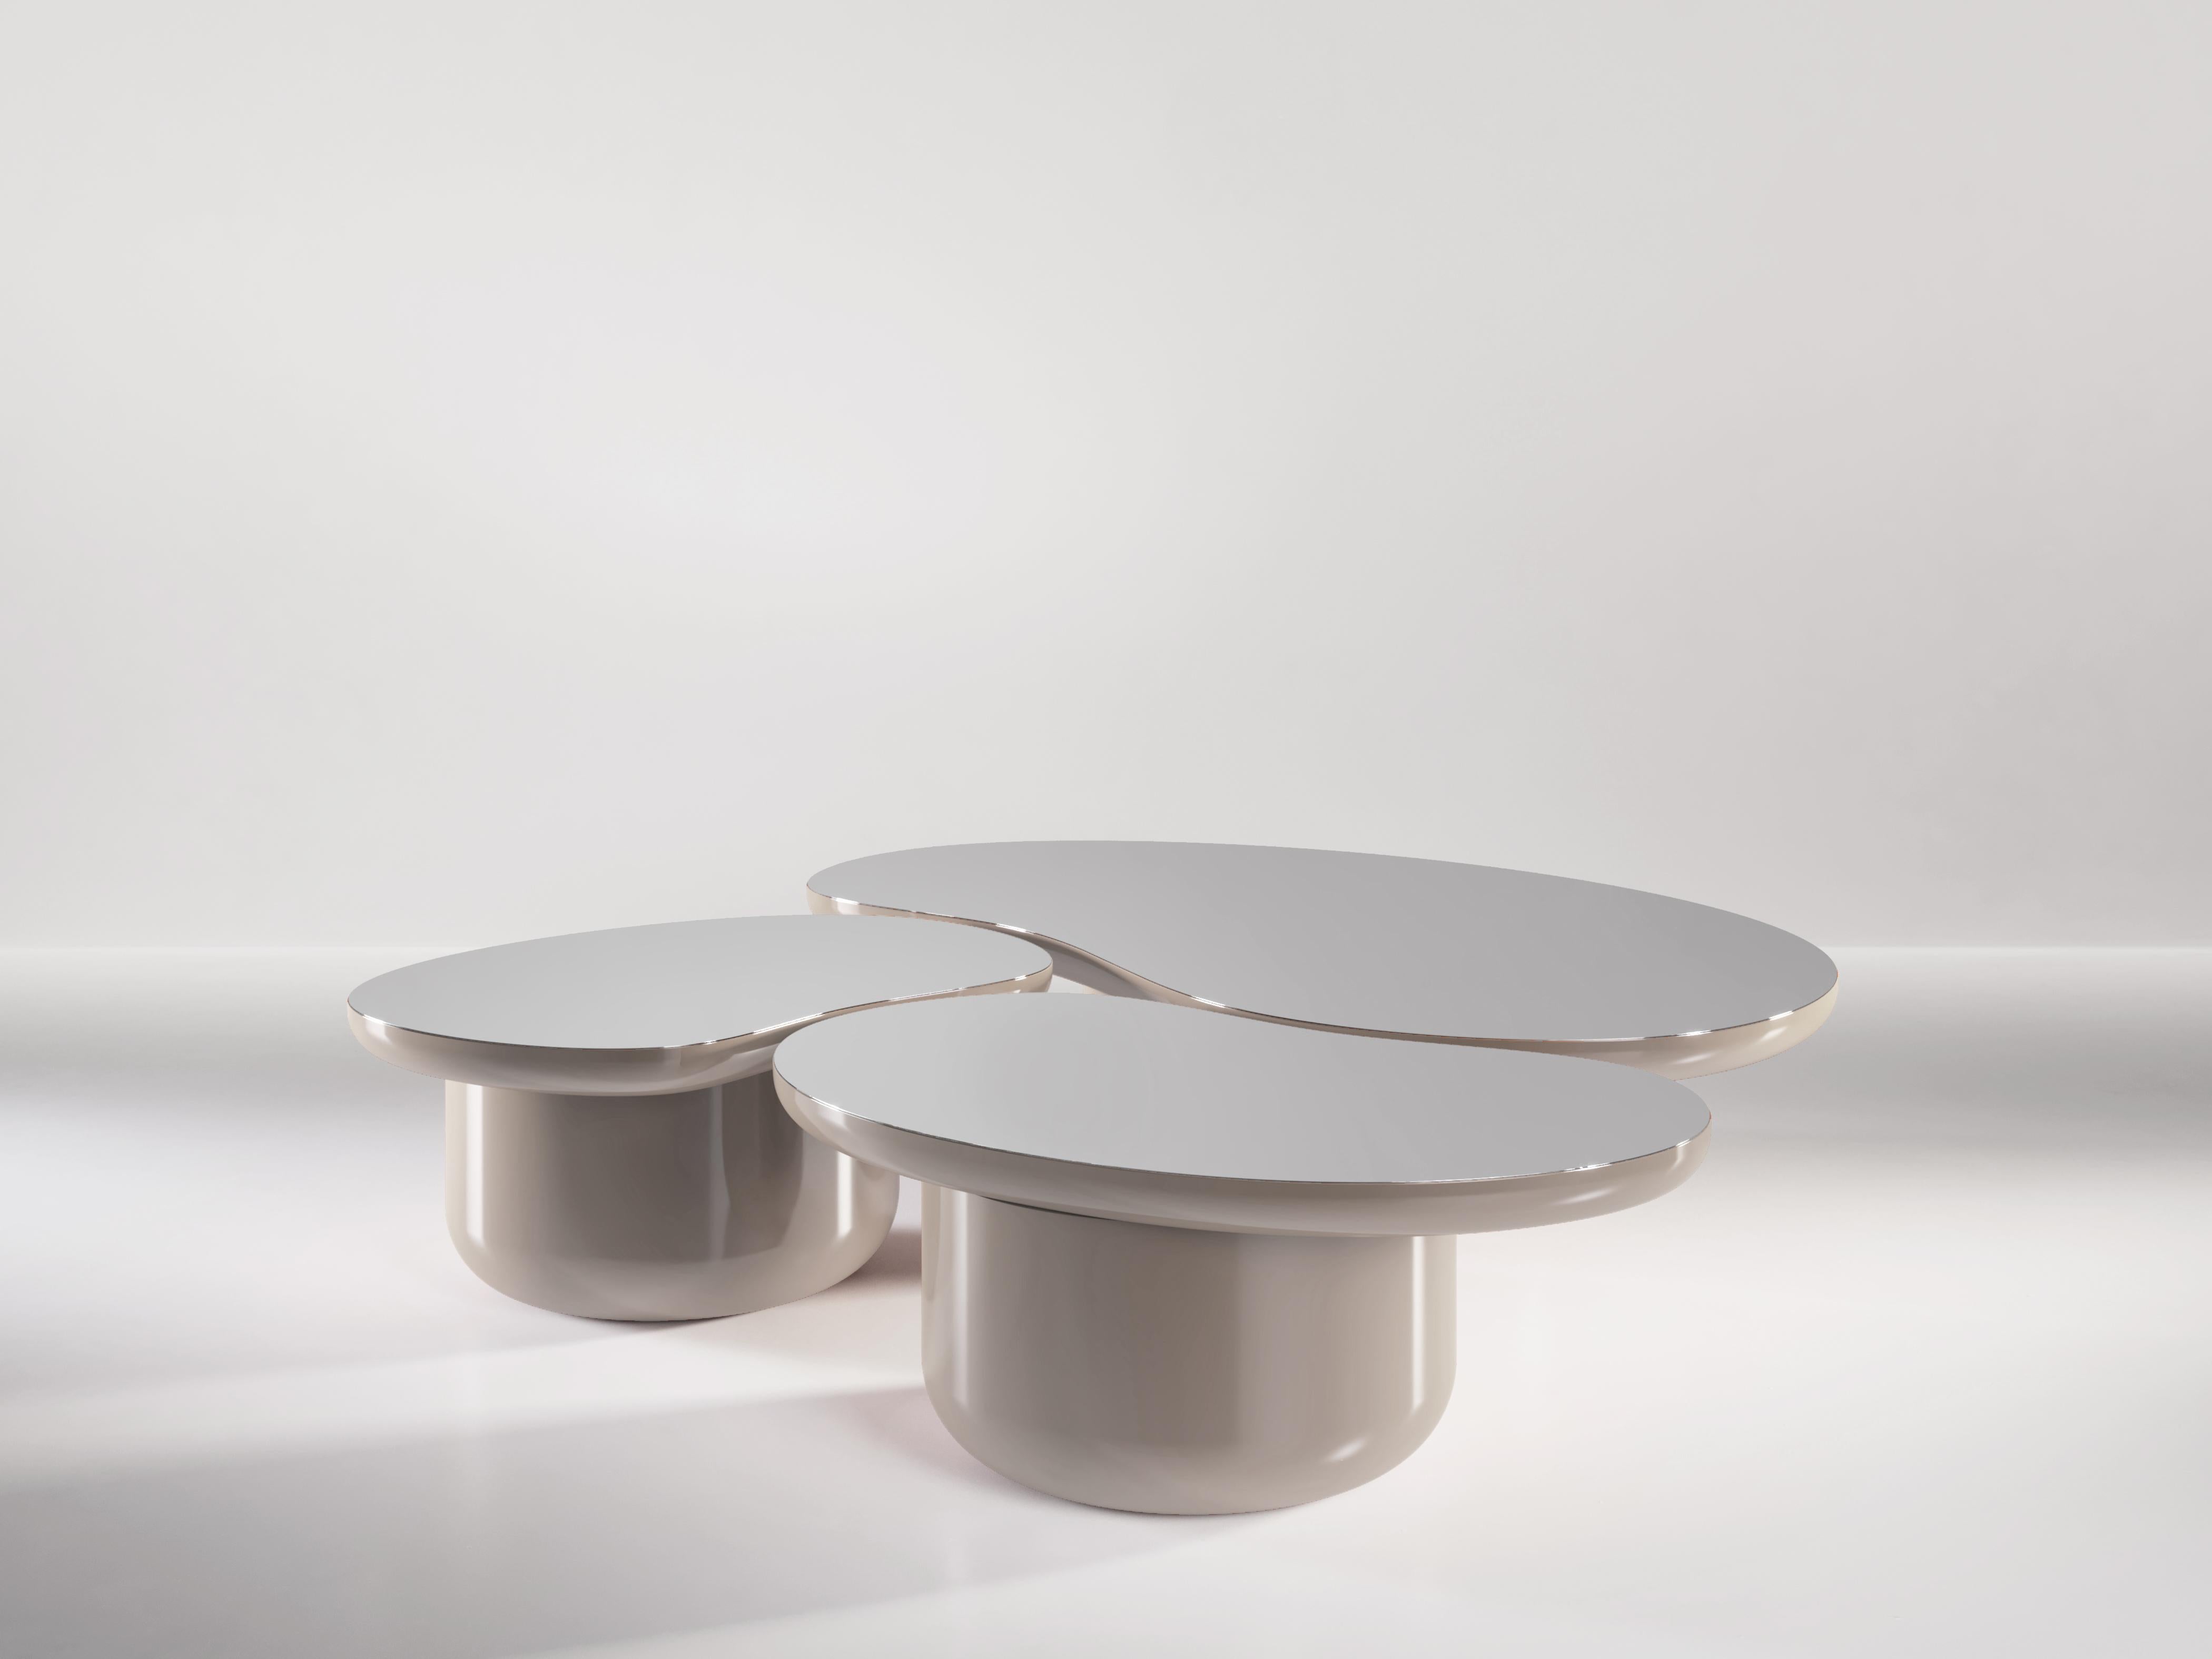 The Laghi coffee tables are a group of low coffee tables, each in the shape of a body of water and inspired by the peacefulness and beauty of the Lake District in United Kingdom. Each table is topped with a polished piece of aluminum to symbolize